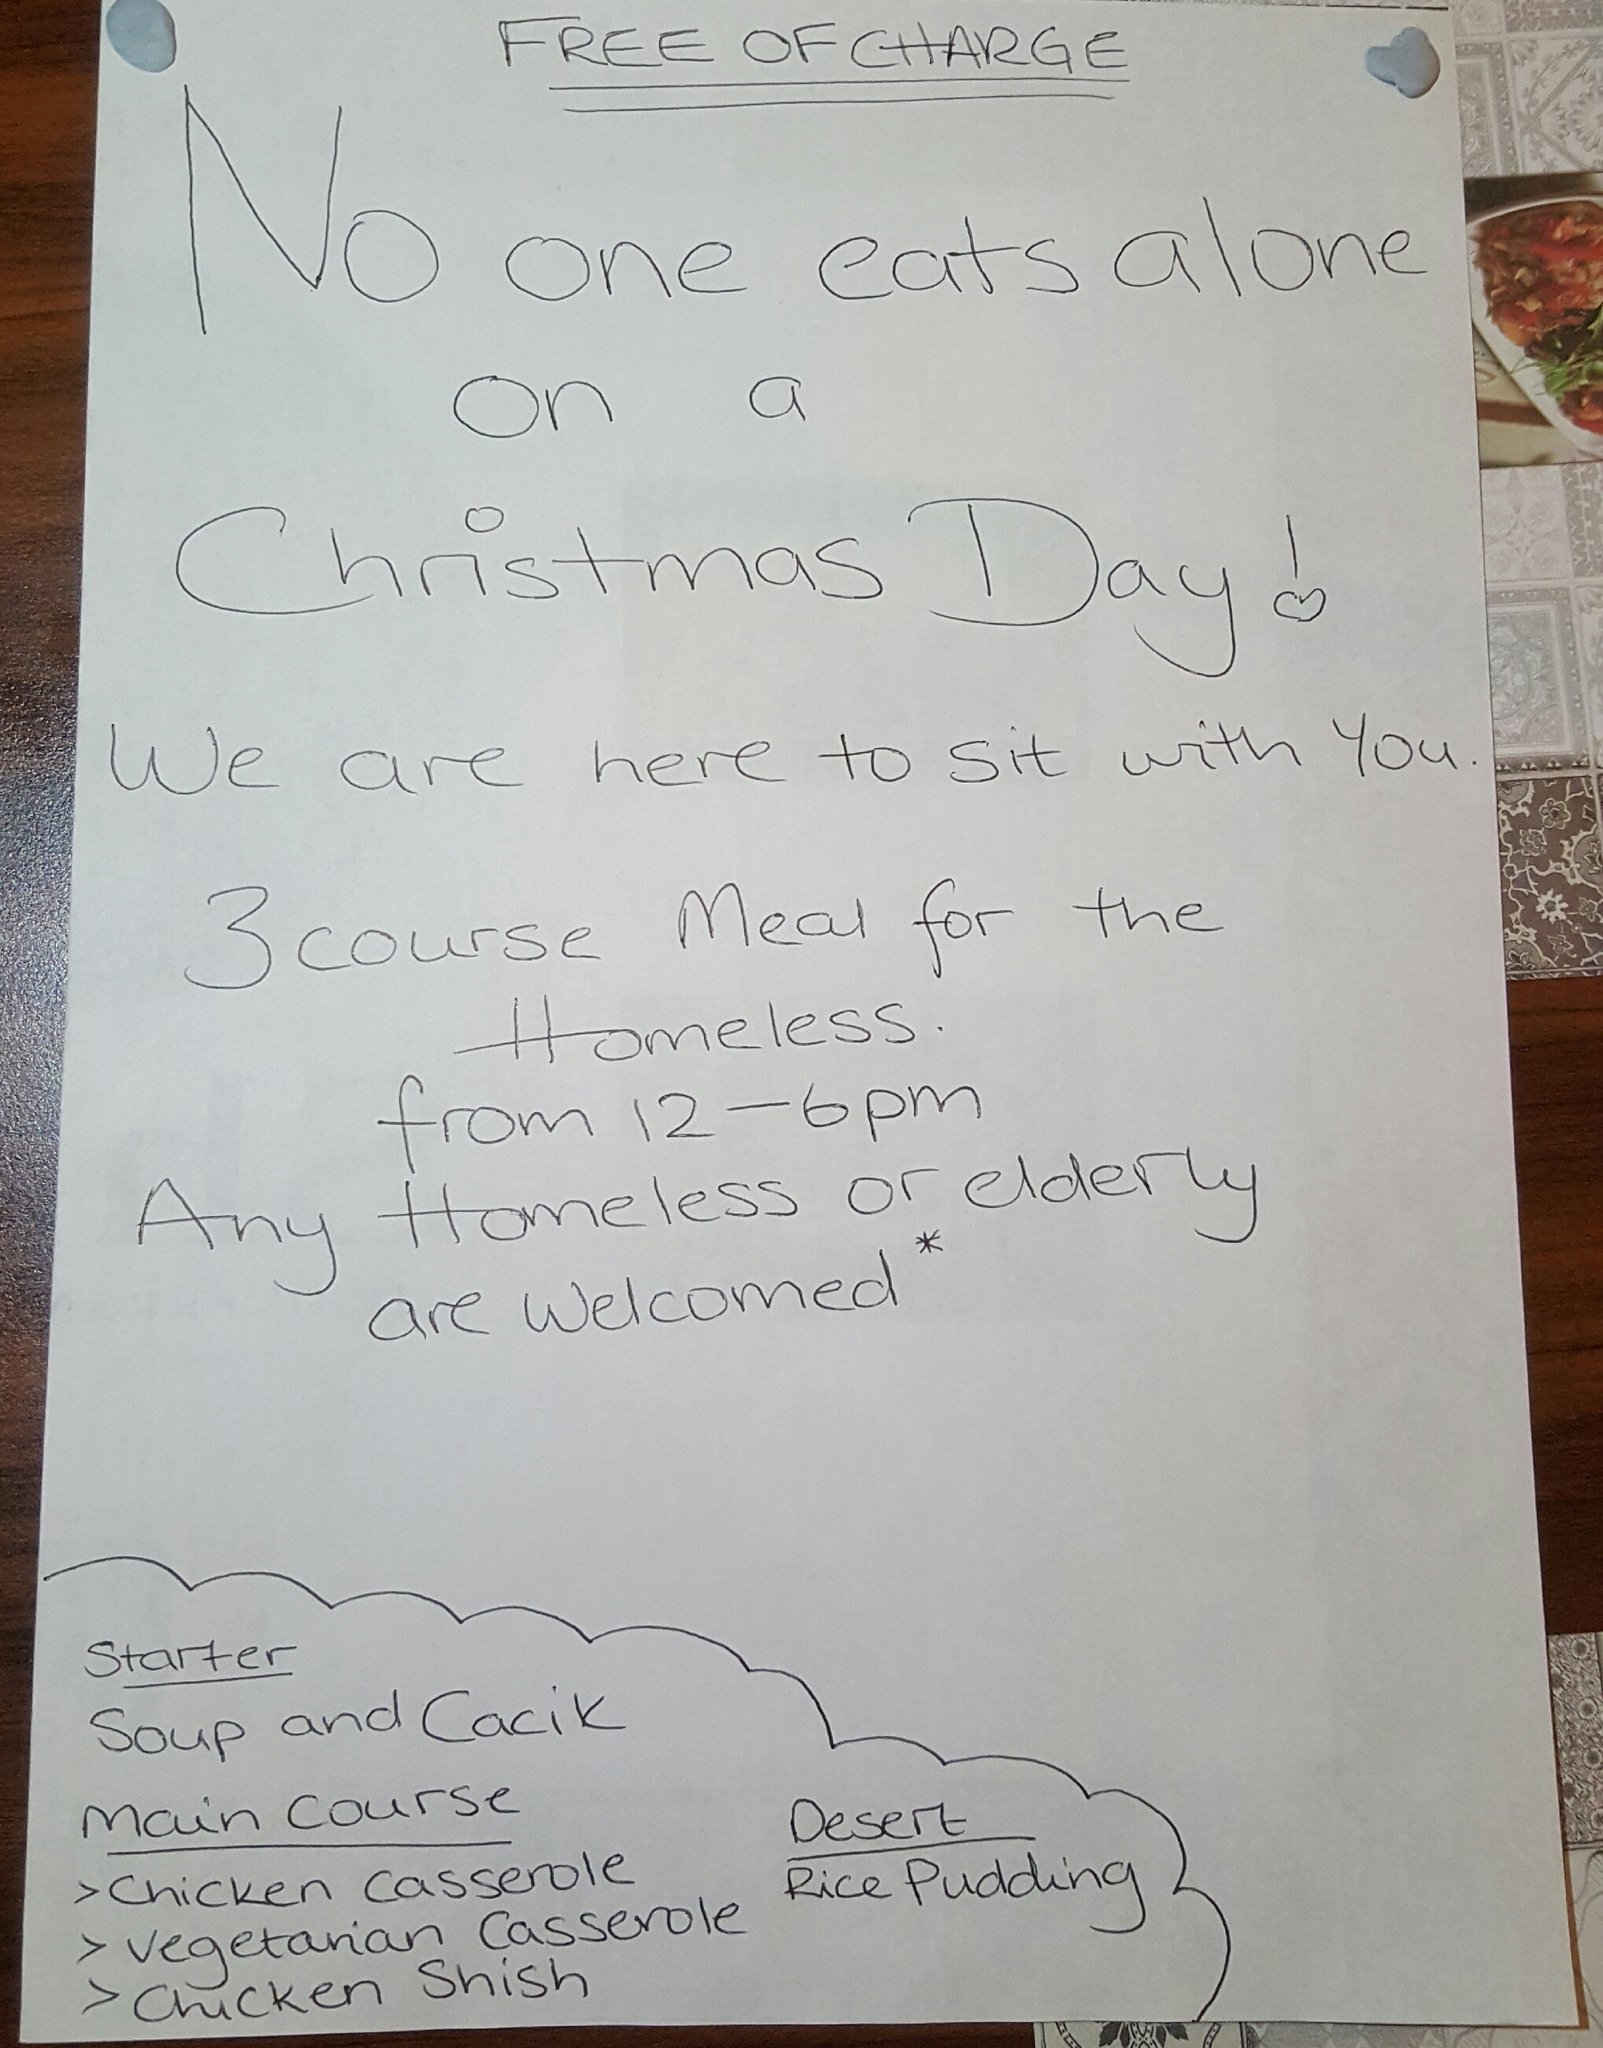 'No one eats alone on Christmas Day': Turkish restaurant offers free meal for lonely and elderly